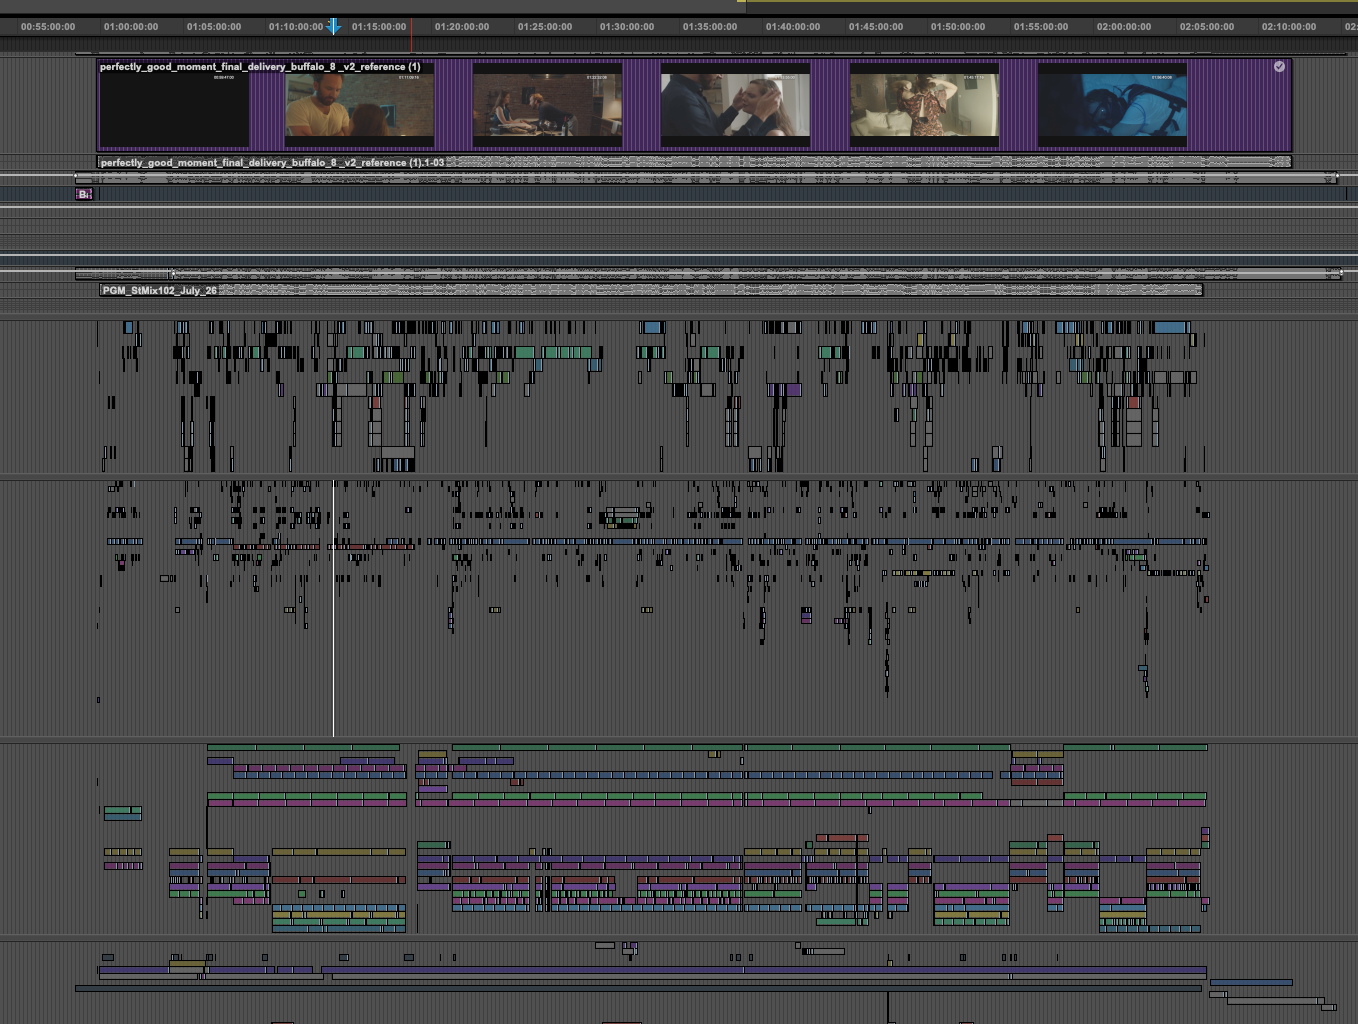 A screen shot of a pro tools editing timeline for a feature film.